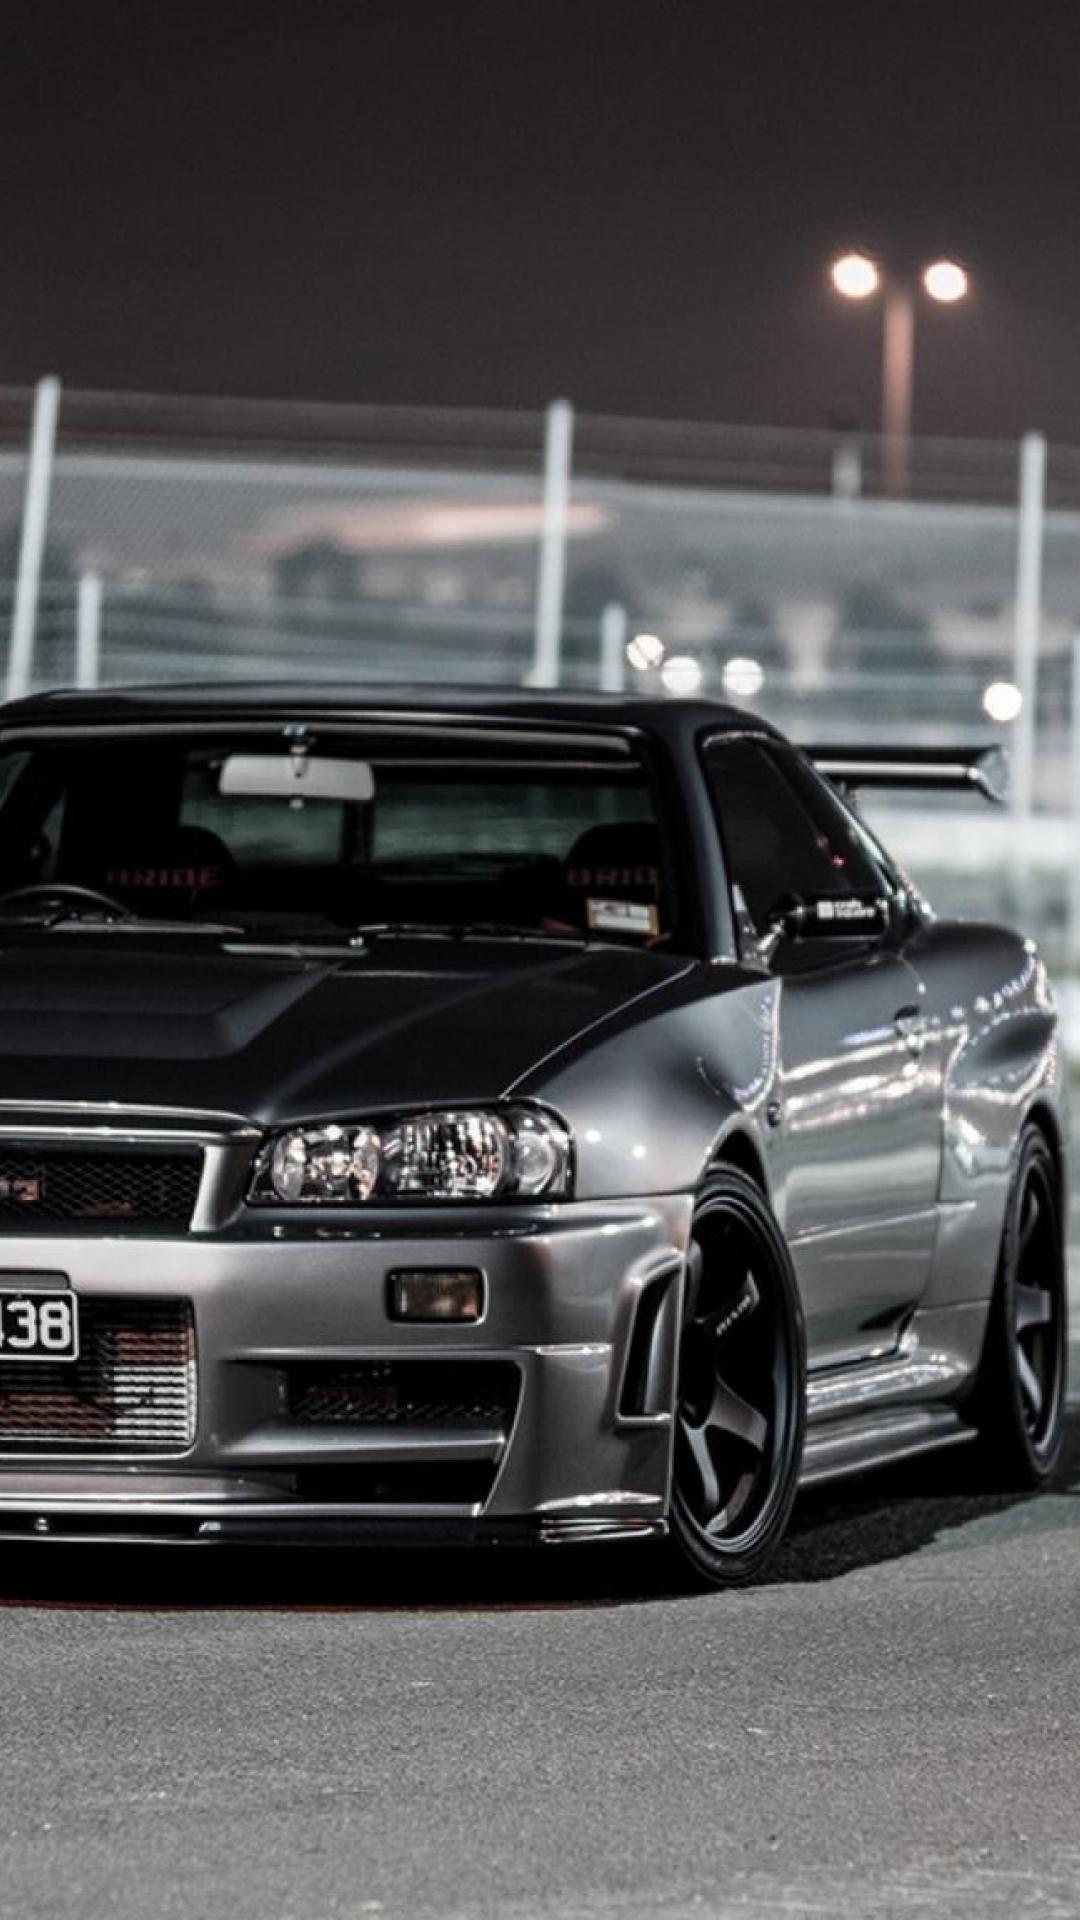 Skyline R34 Wallpapers Top Free Skyline R34 Backgrounds